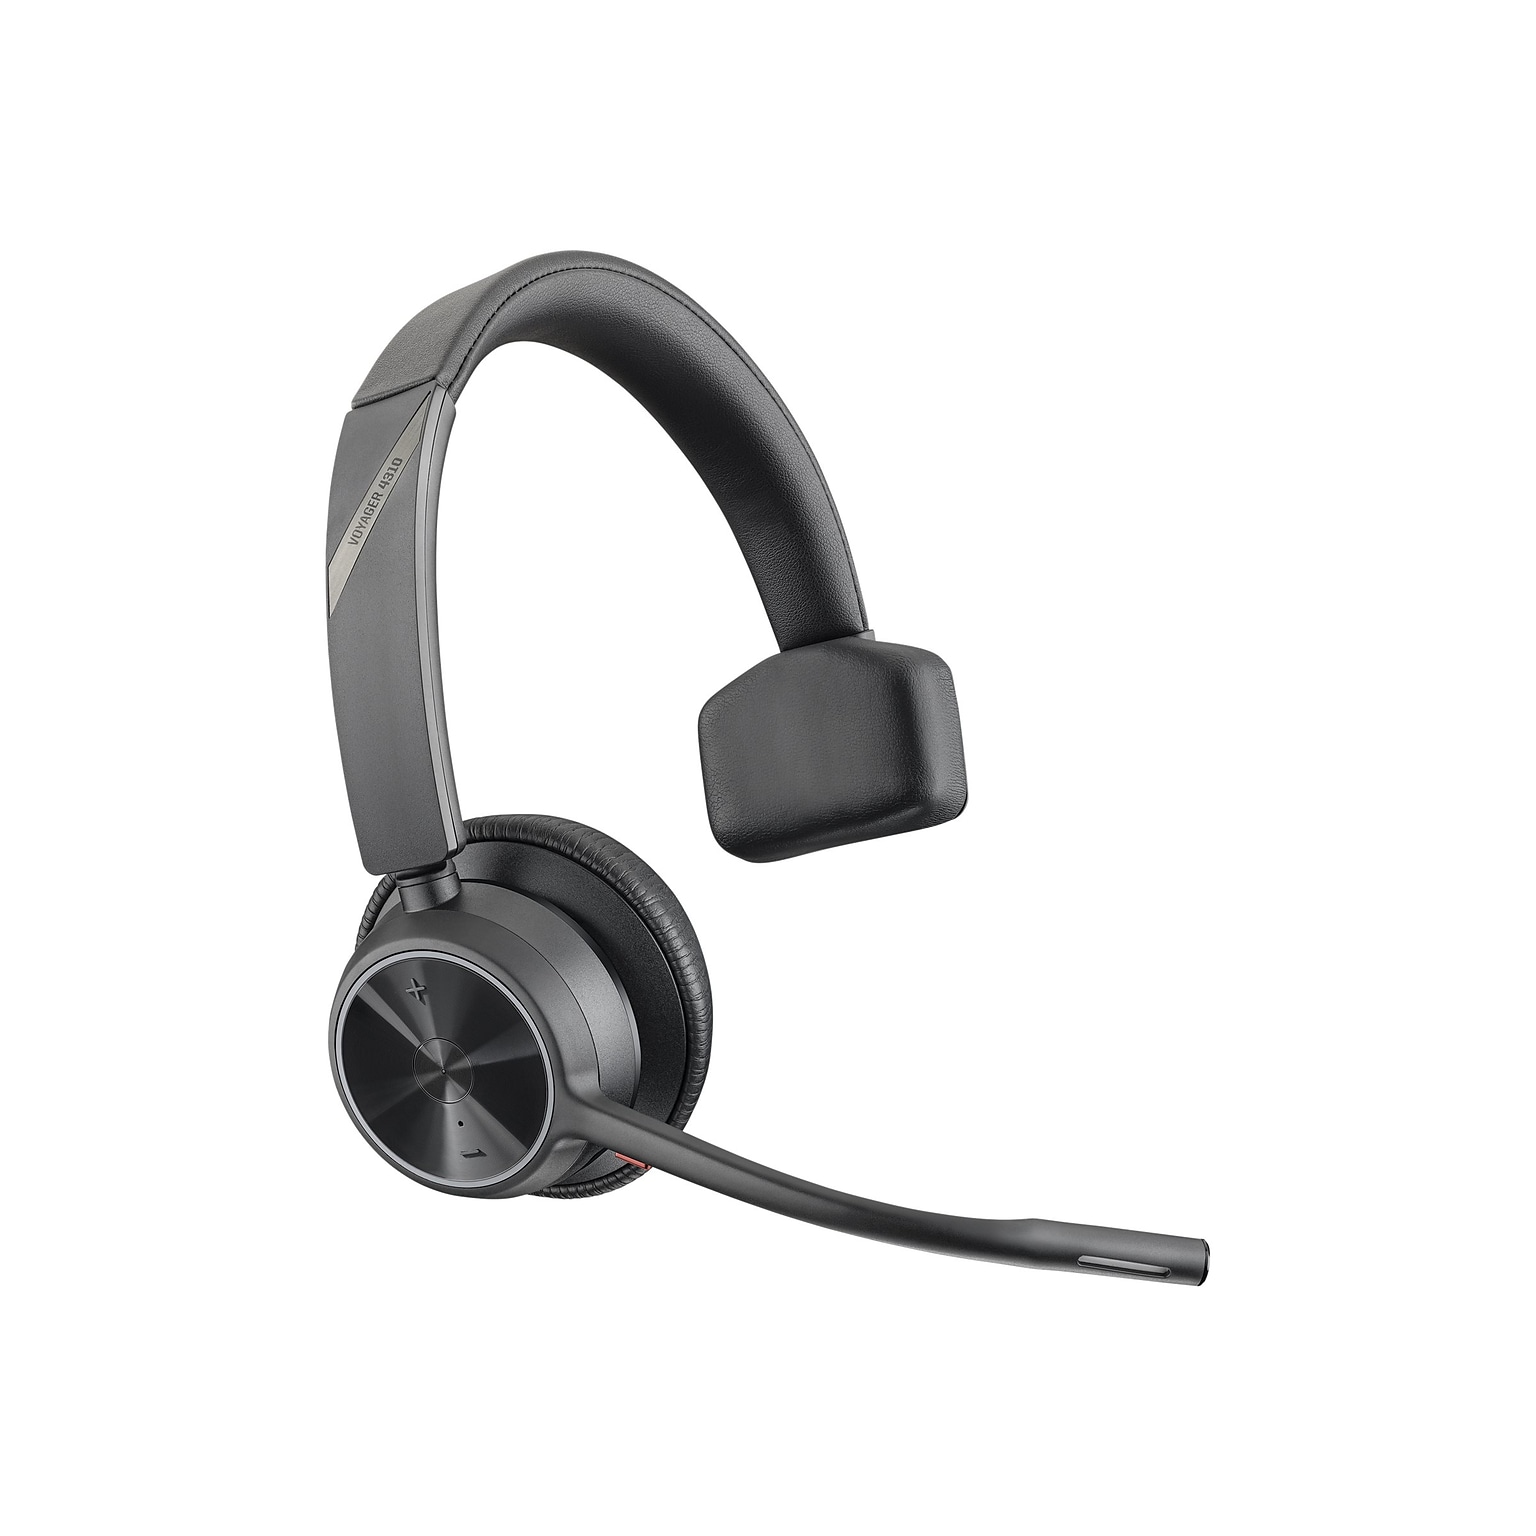 Plantronics Voyager 4310 UC Bluetooth On Ear Computer Headset, Black and Gray (218470-01)